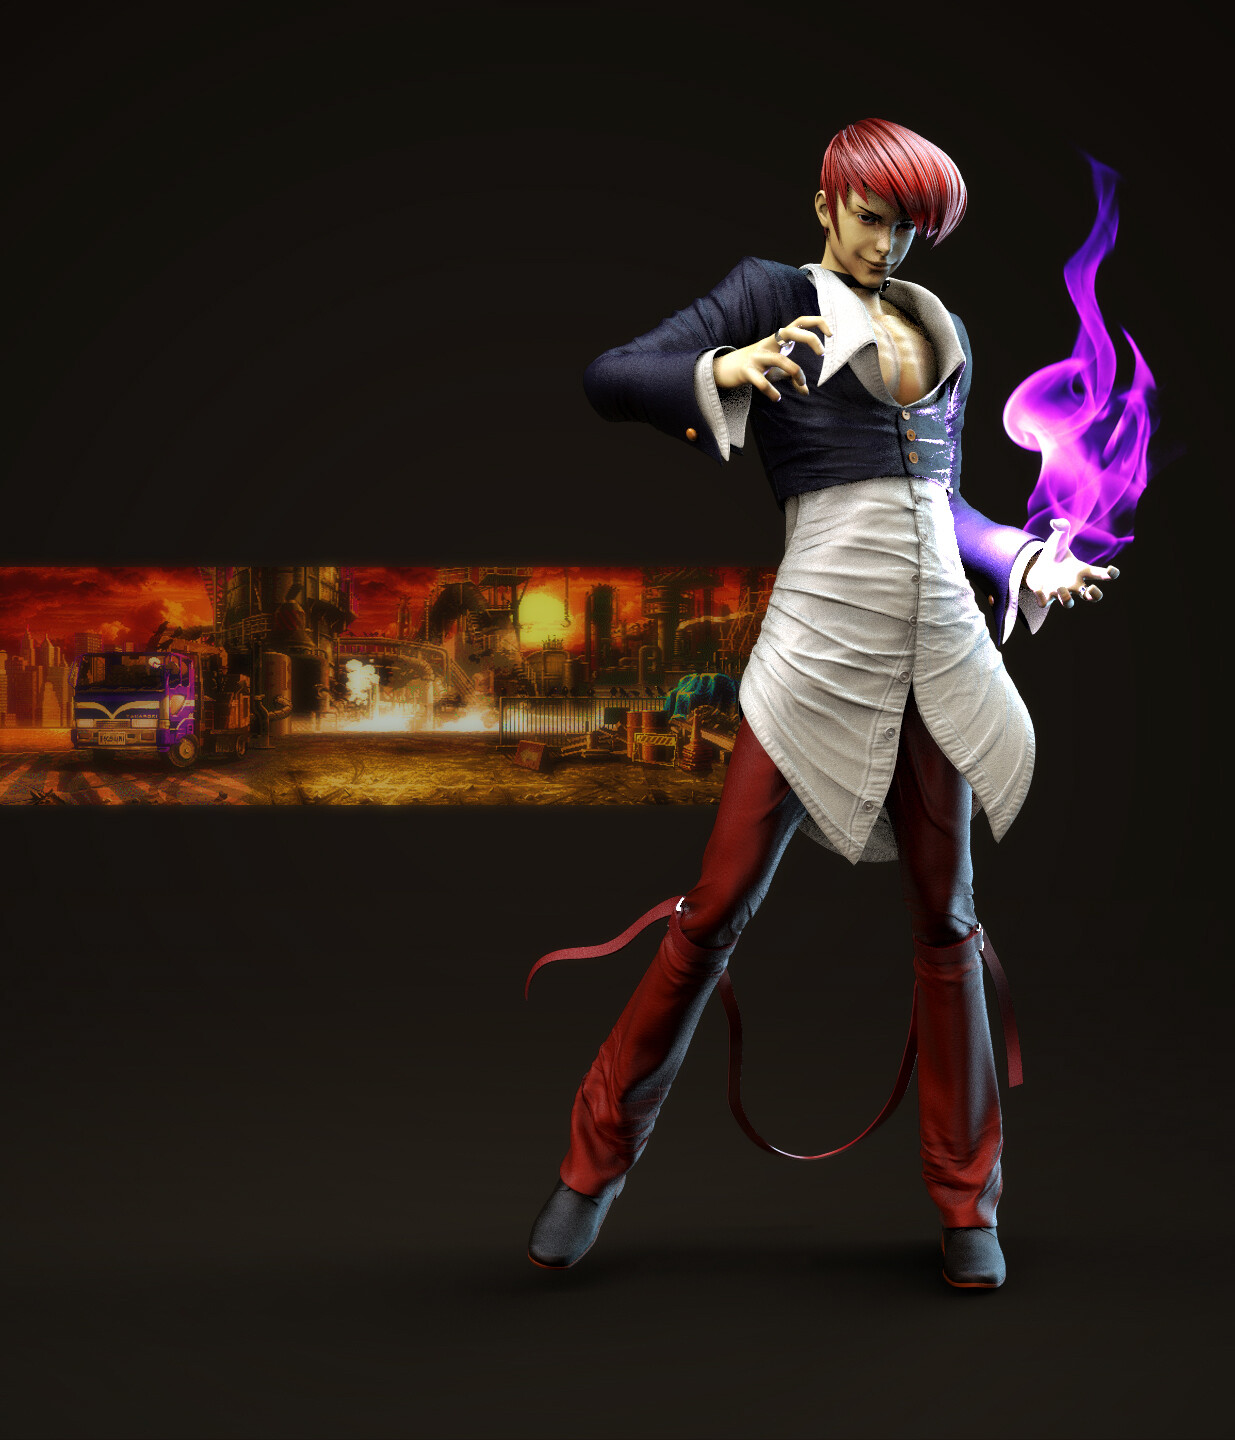 ArtStation - THE KING OF FIGHTERS 97 Iori Yagami 1/8 Scale Statue